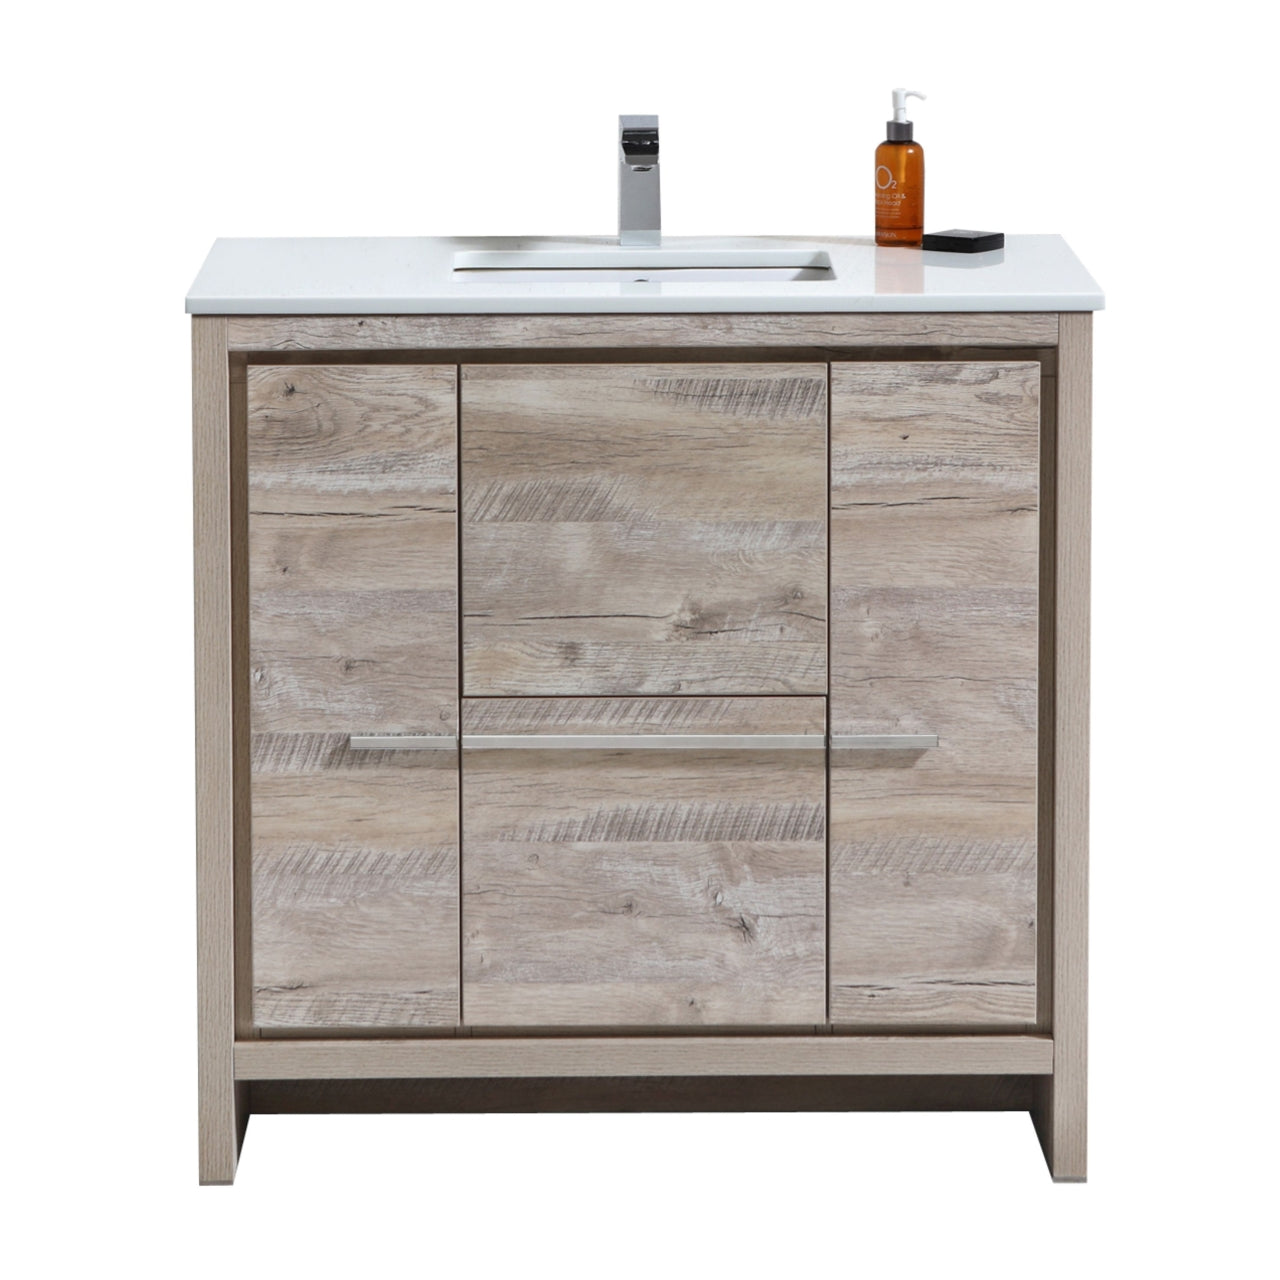 KUBEBATH Dolce AD636NW 36" Single Bathroom Vanity in Nature Wood with White Quartz, Rectangle Sink, Front View